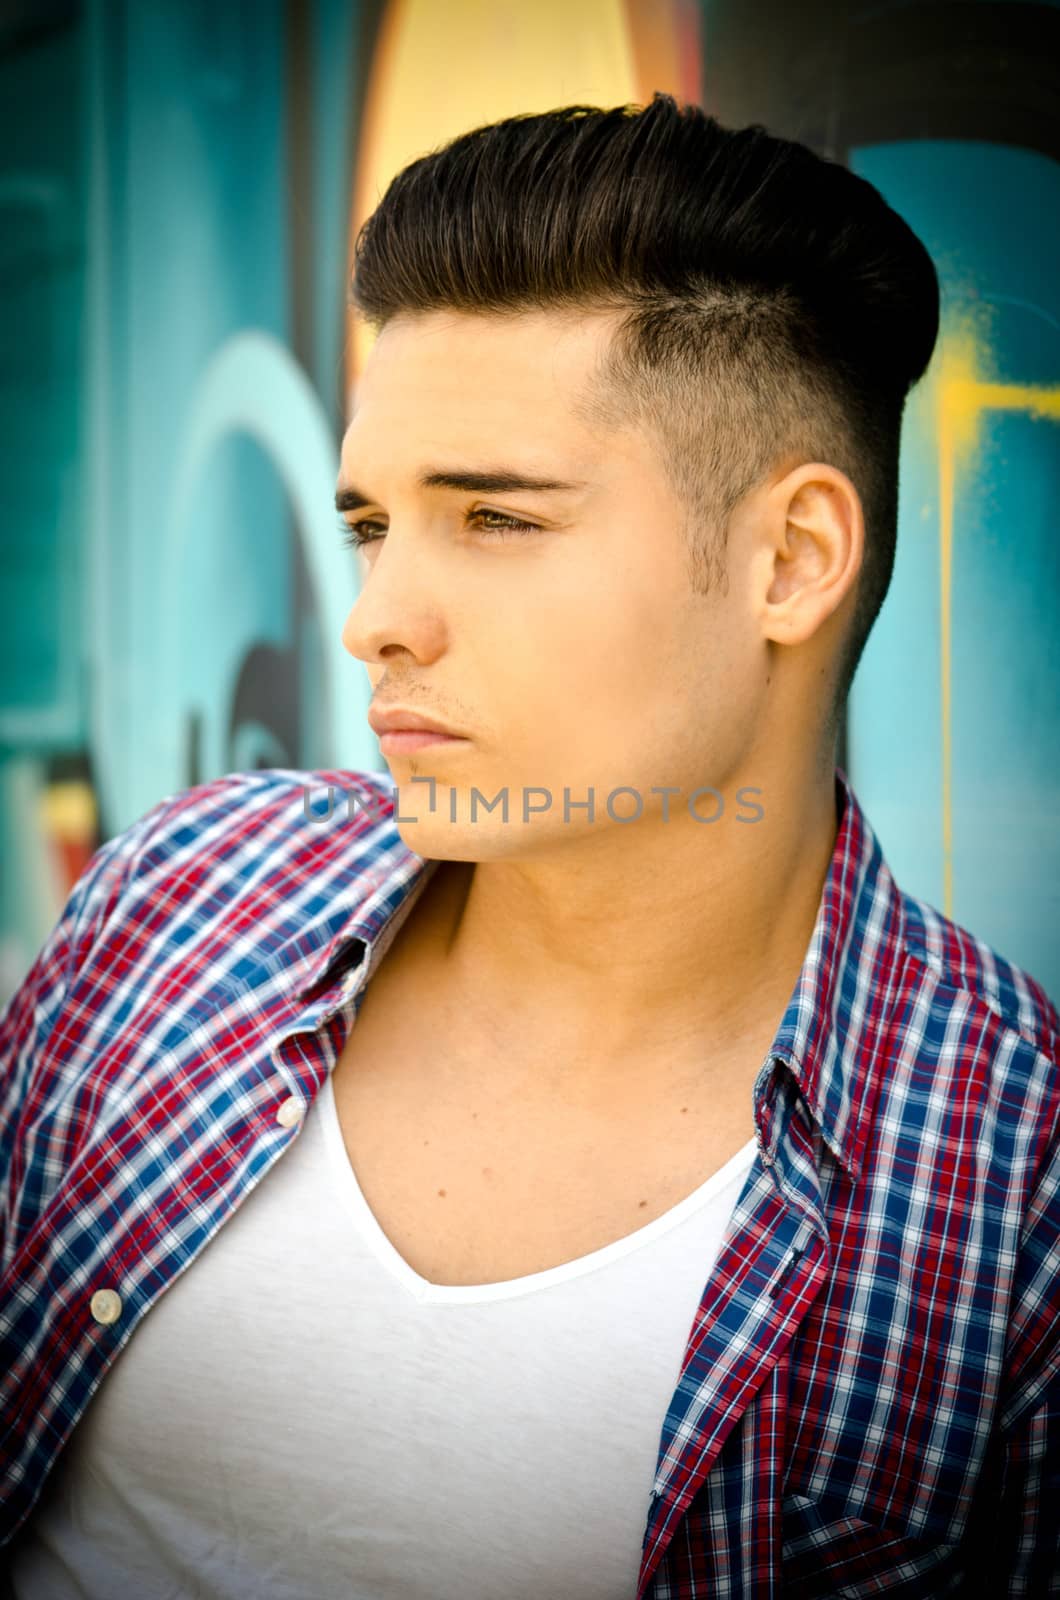 Handsome young man against colorful graffiti wall by artofphoto